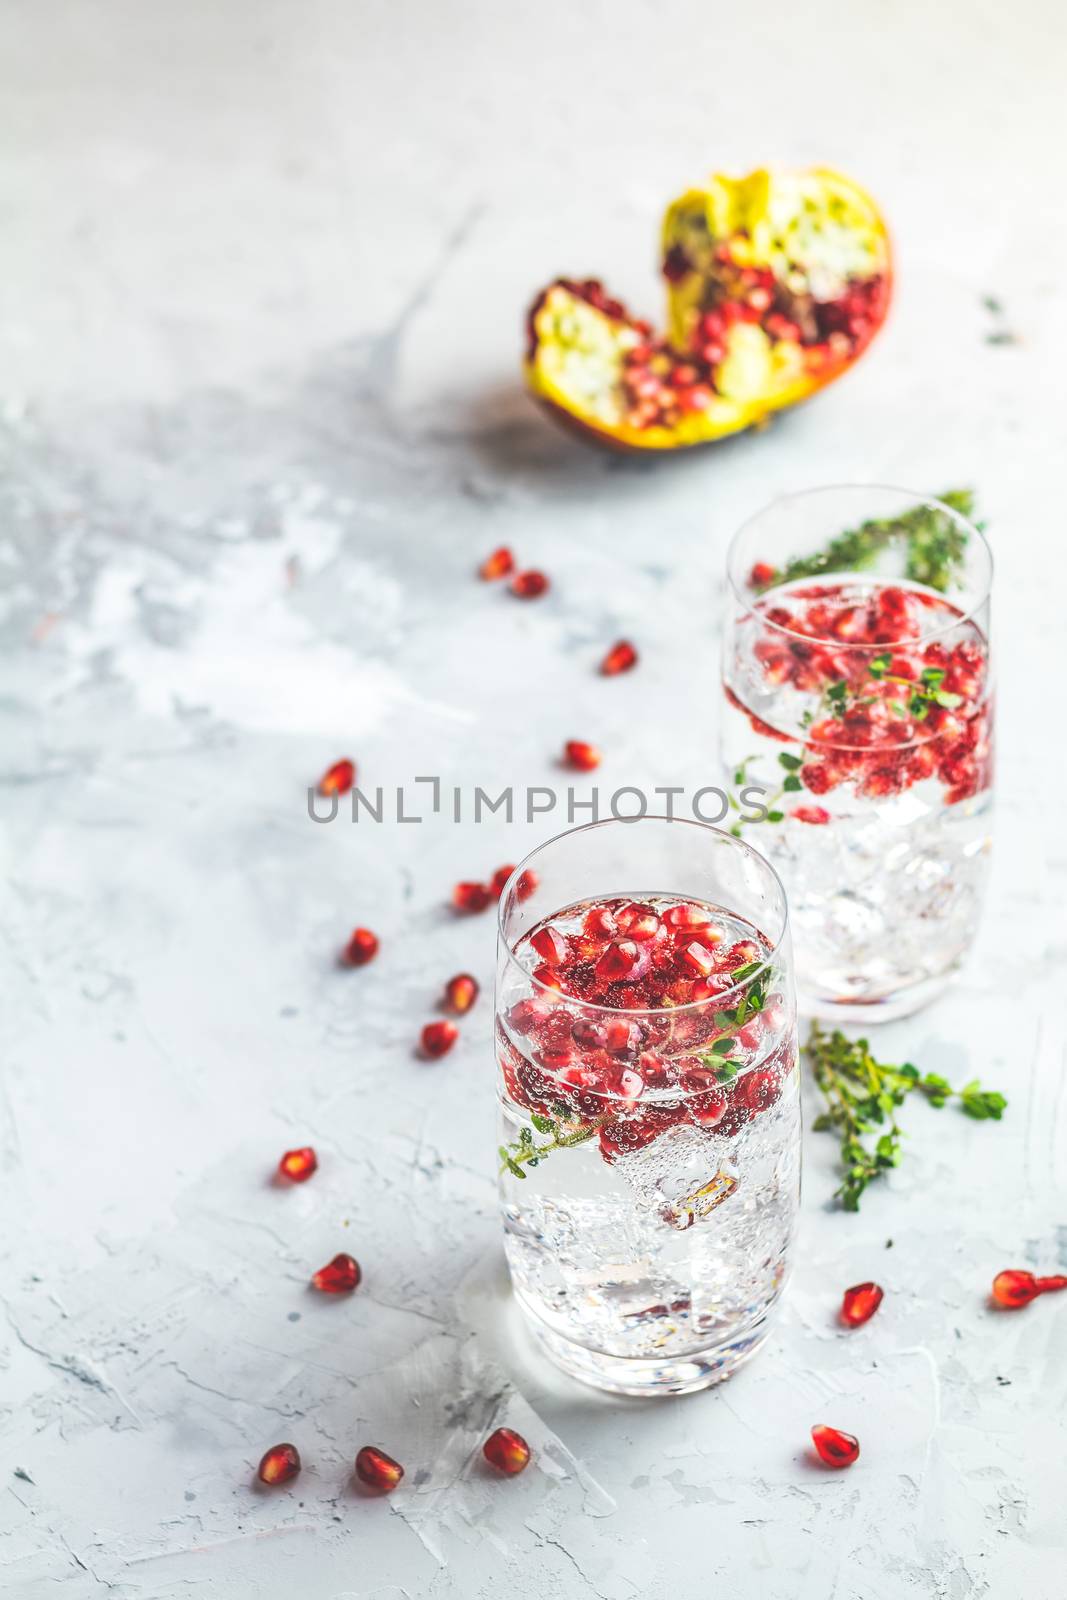 Festive drinks, gin and tonic pomegranate cocktail or detox water with ice. Selective focus, copy space for text, light gray concrete table surface.